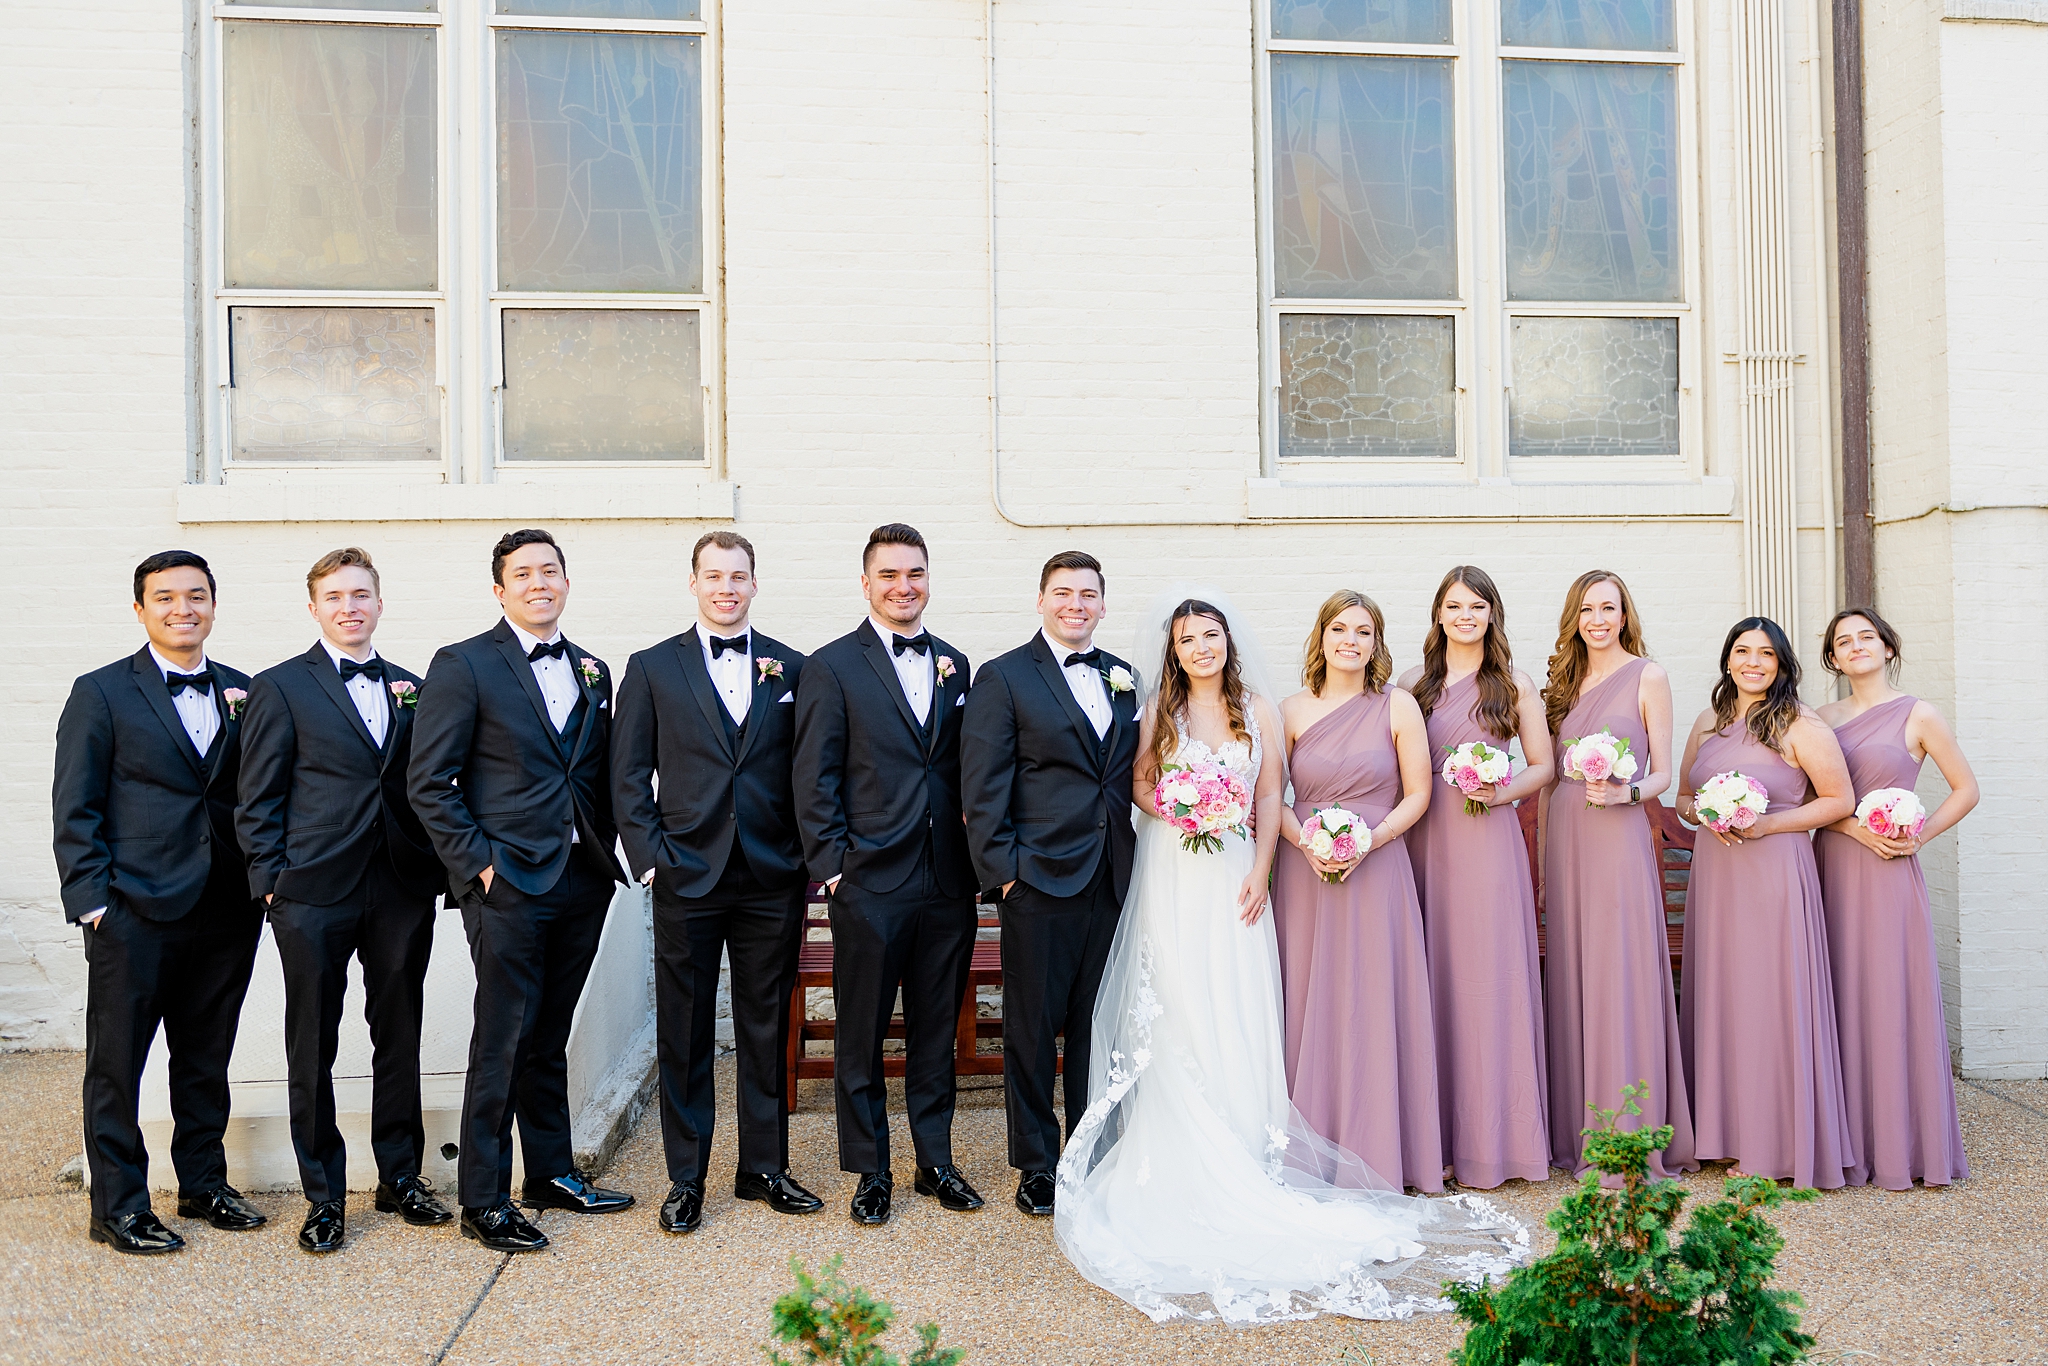 Bridal Party portraits in front of Basilica of St Mary in Old Town Alexandria.